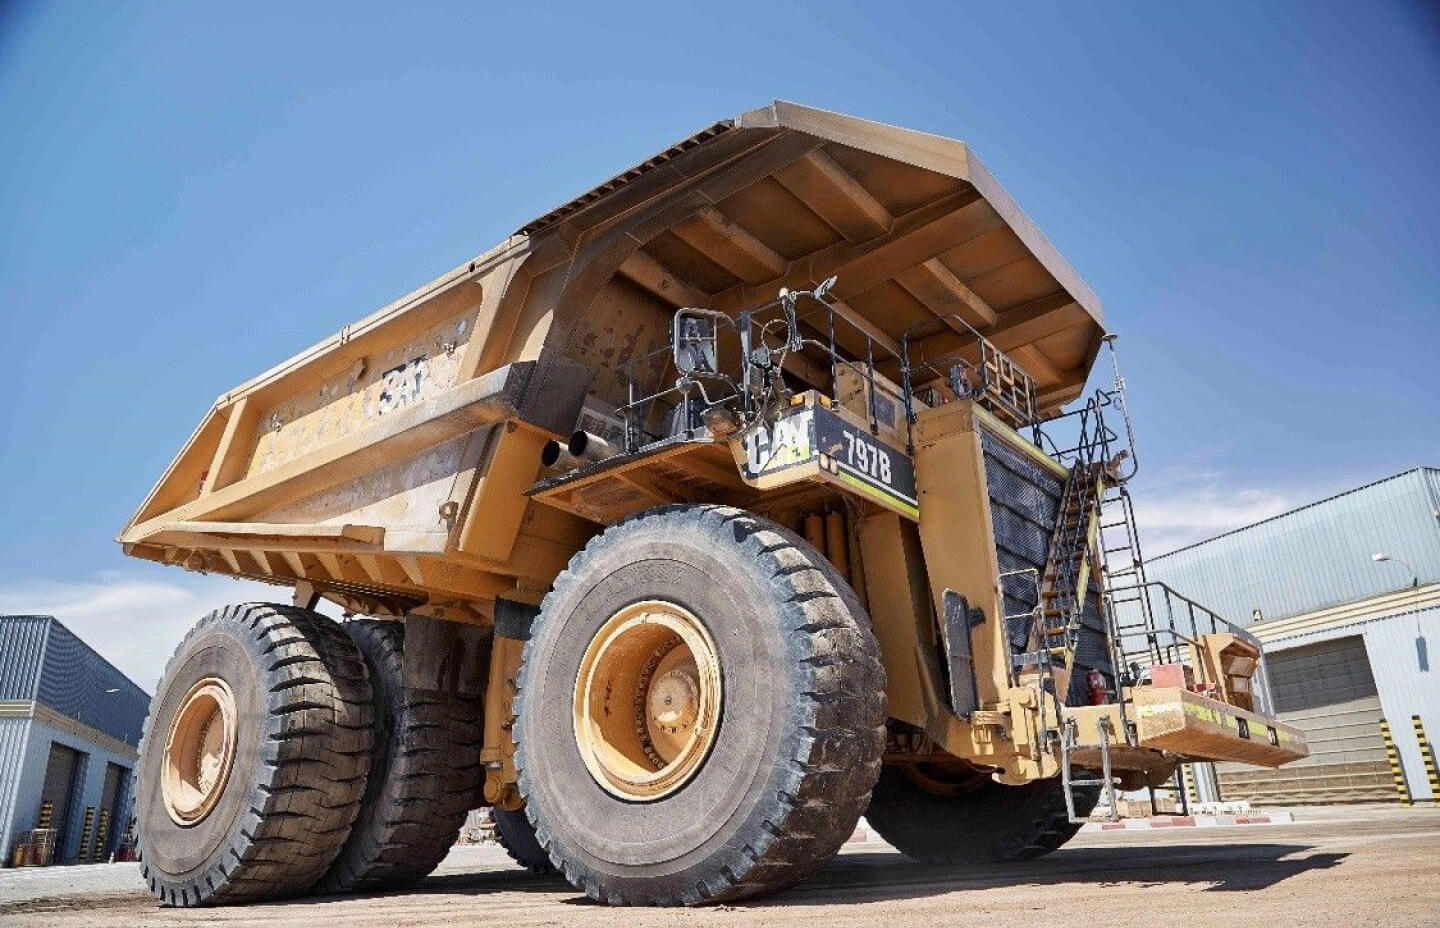 The 797 is the largest mechanical drive dump truck in world!